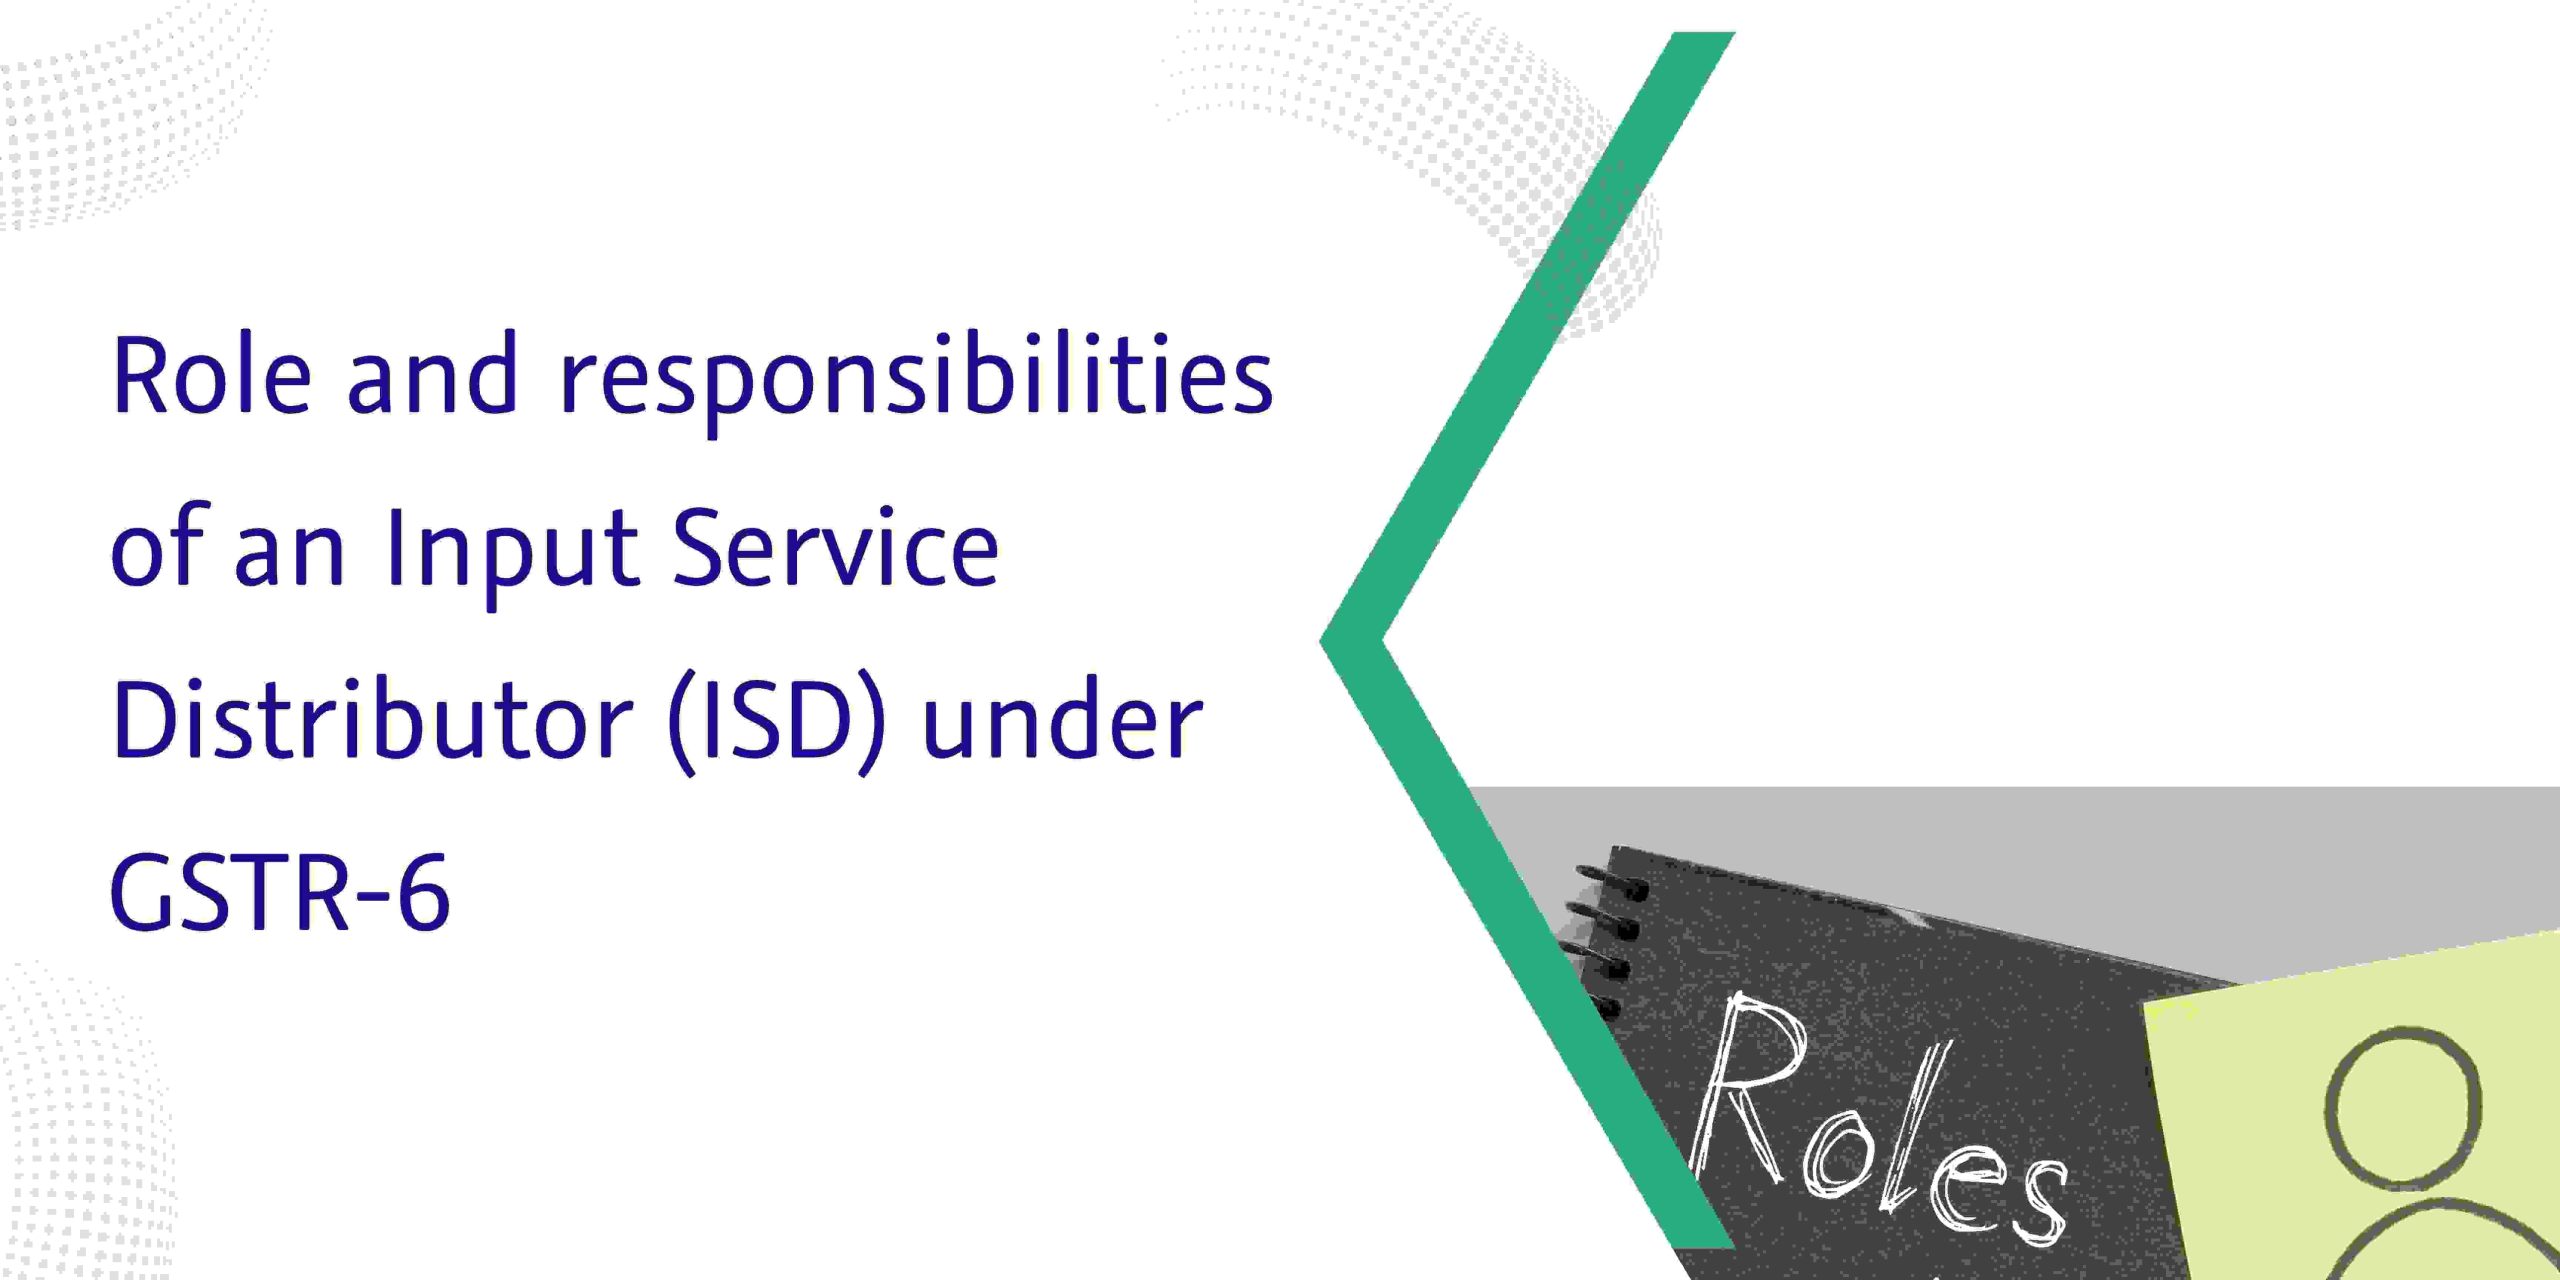 You are currently viewing Role and responsibilities of an Input Service Distributor (ISD) under GSTR-6